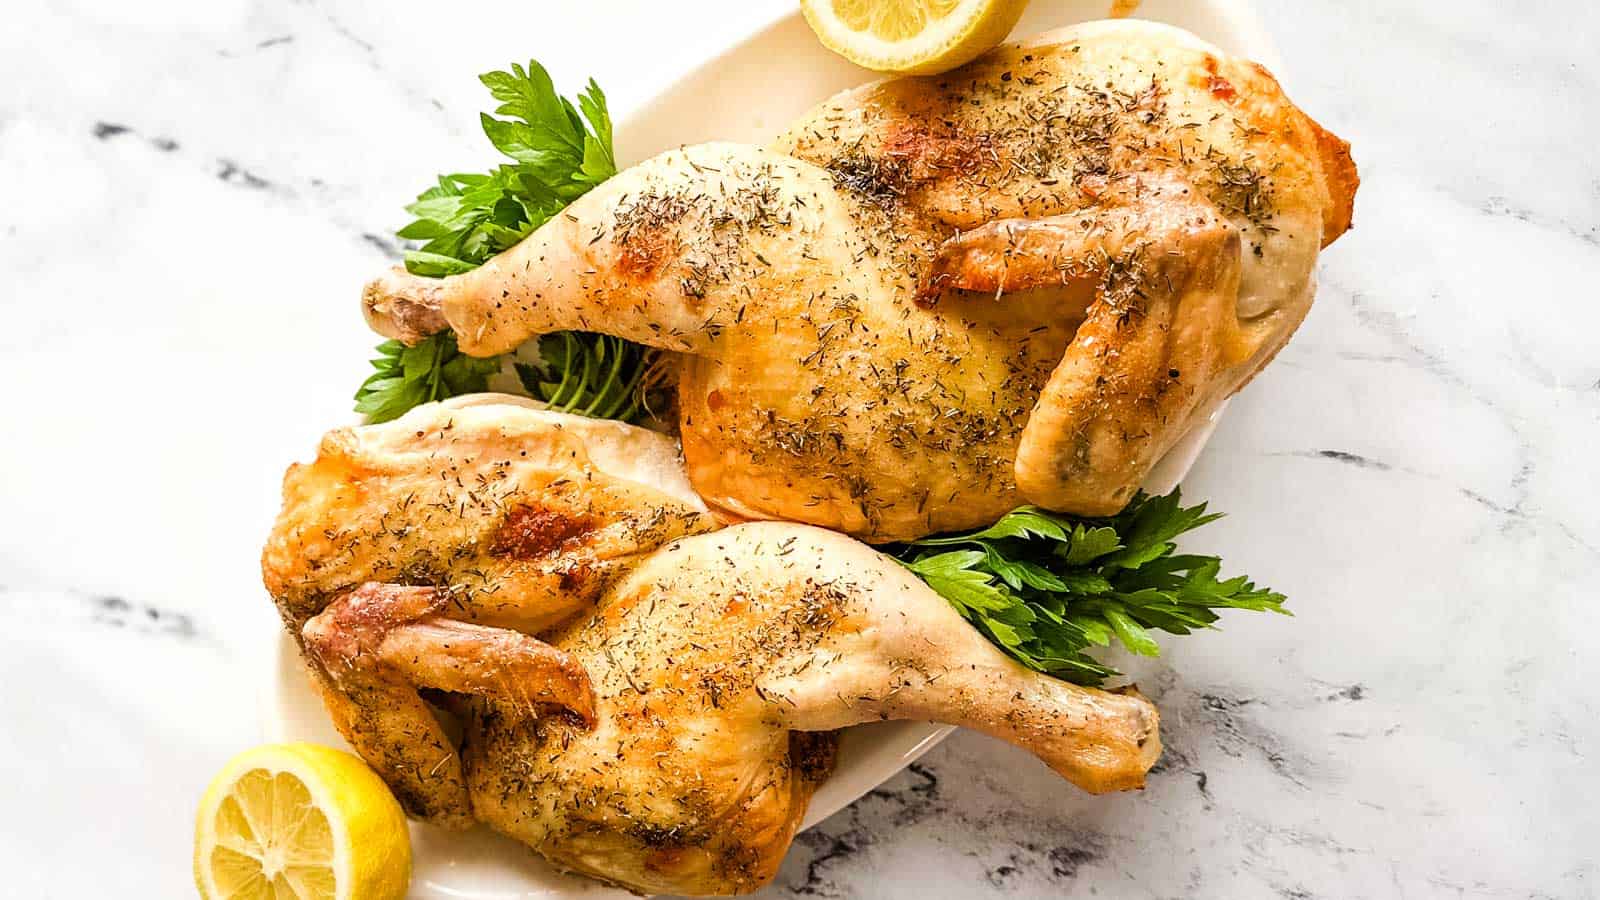 Two roasted chicken halves on a white platter with lemon and parsley.